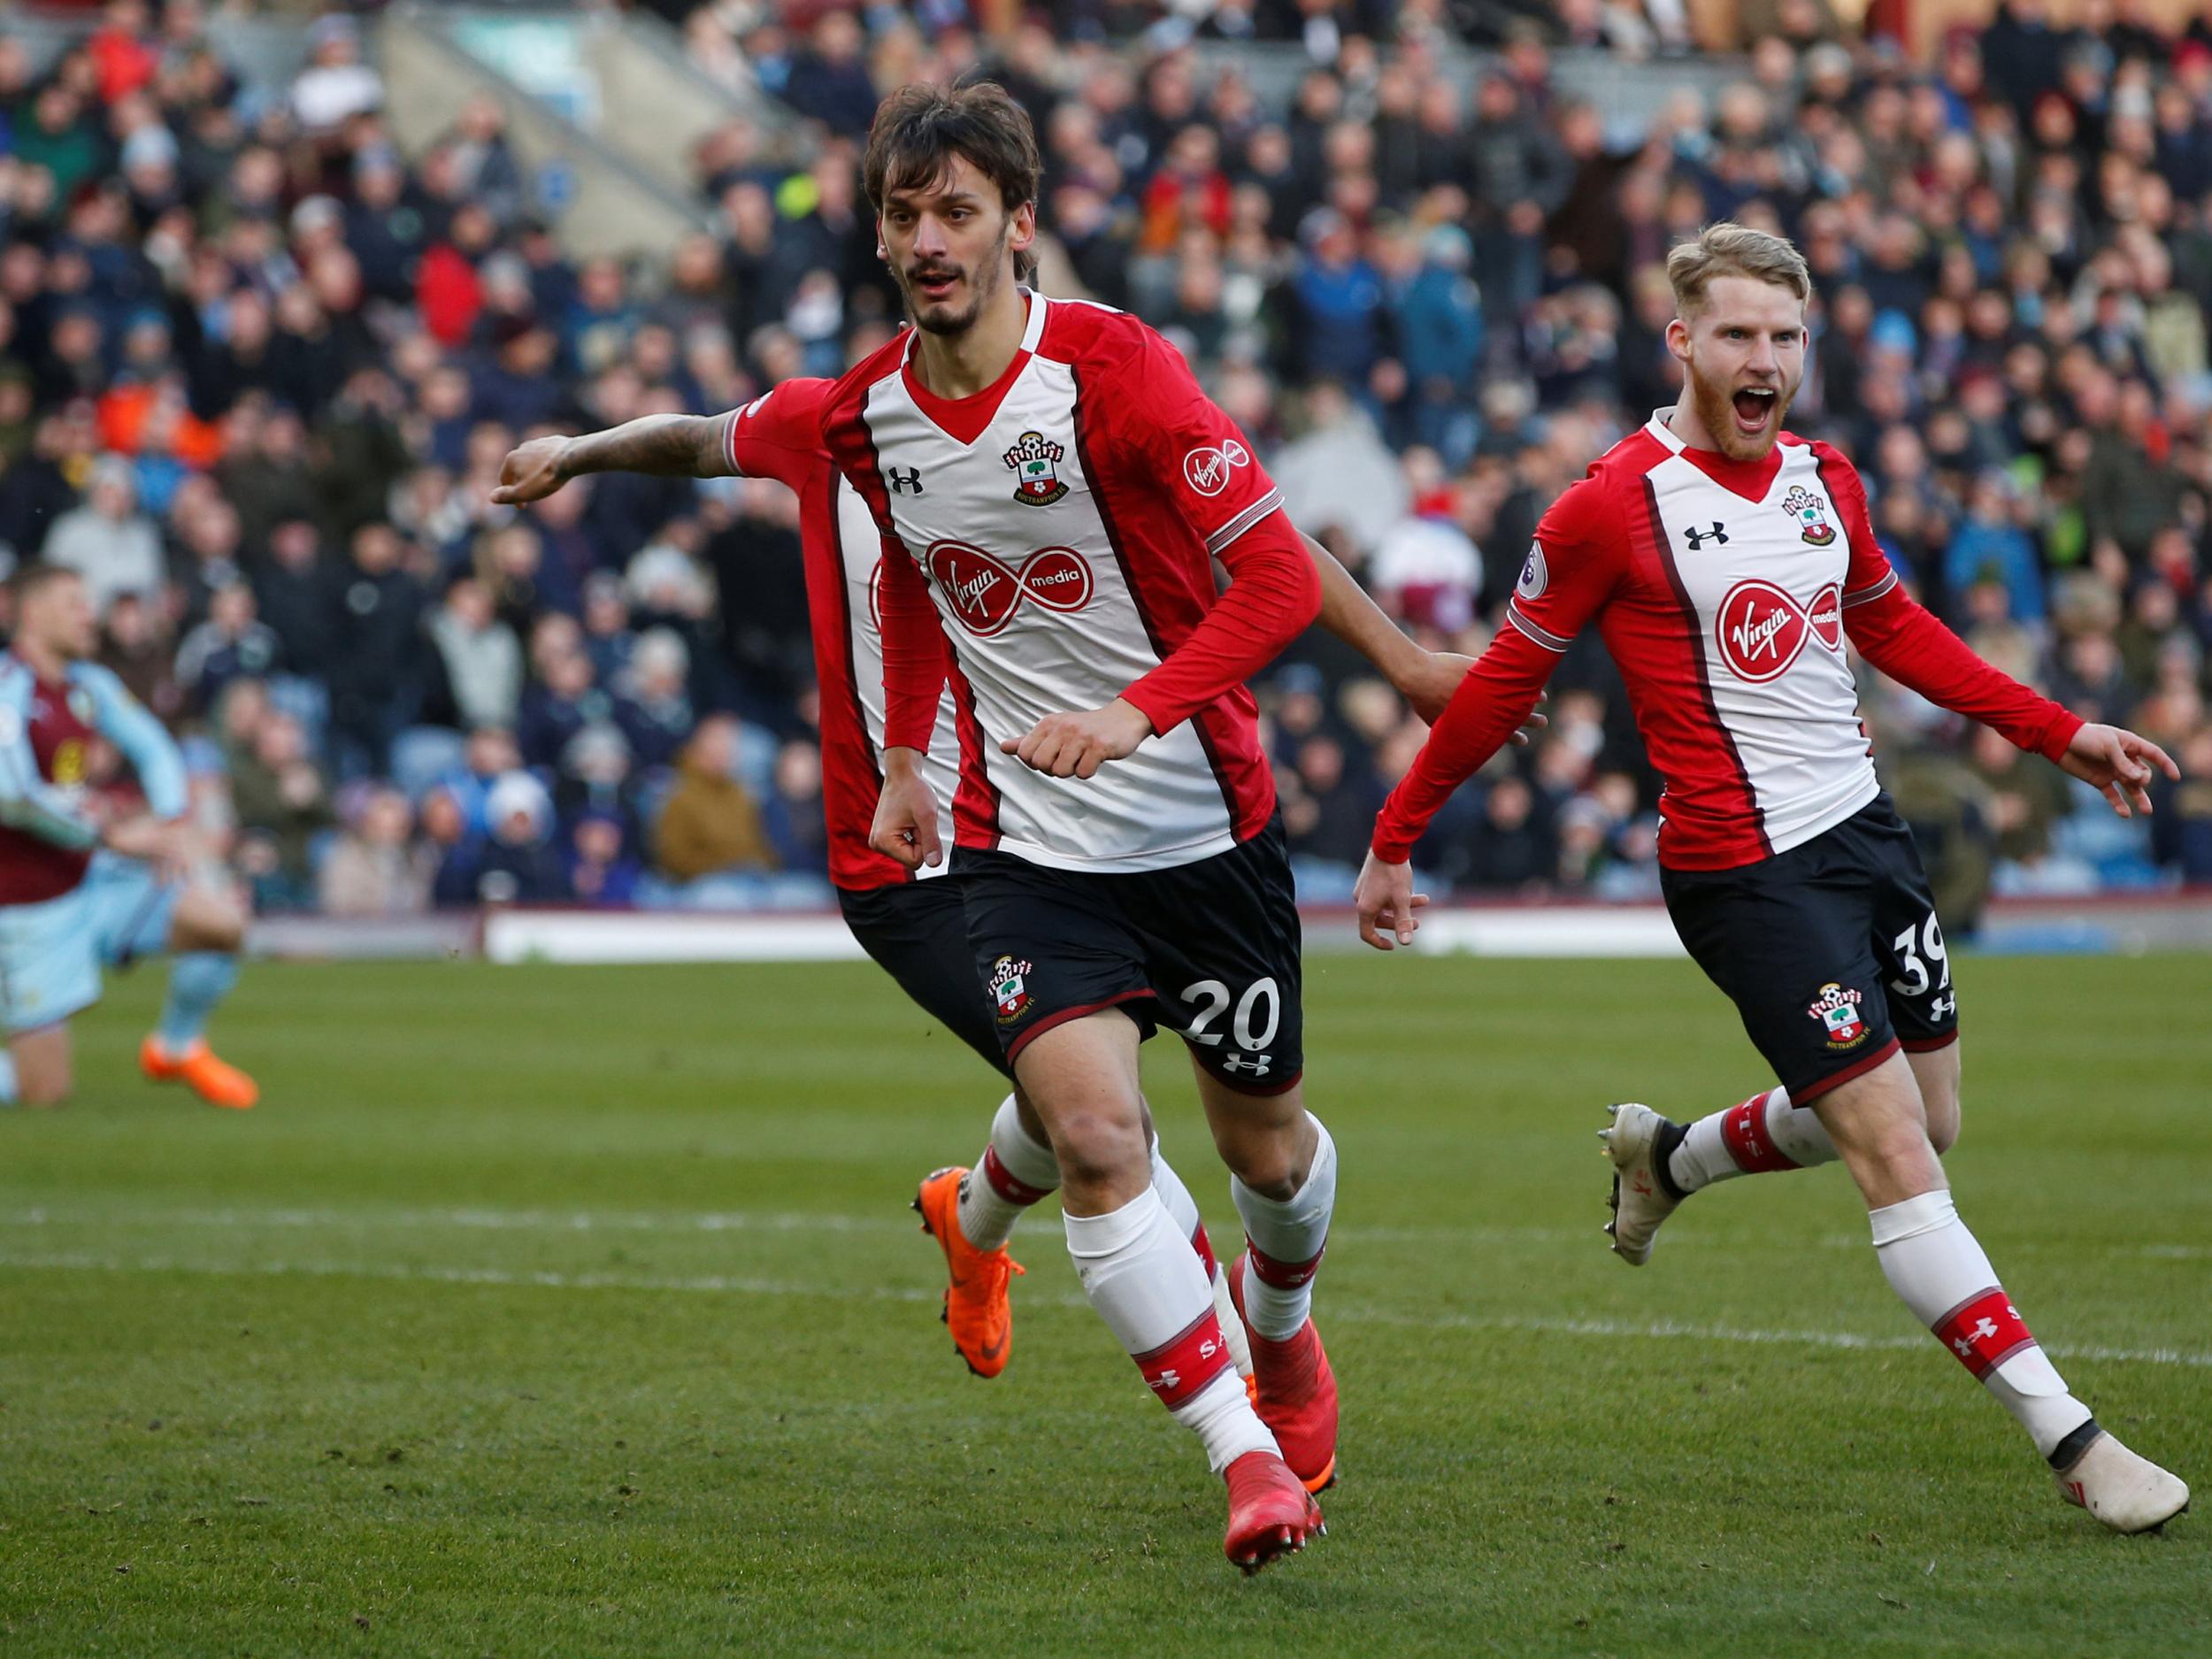 Gabbiadini scores with less than five minutes remaining